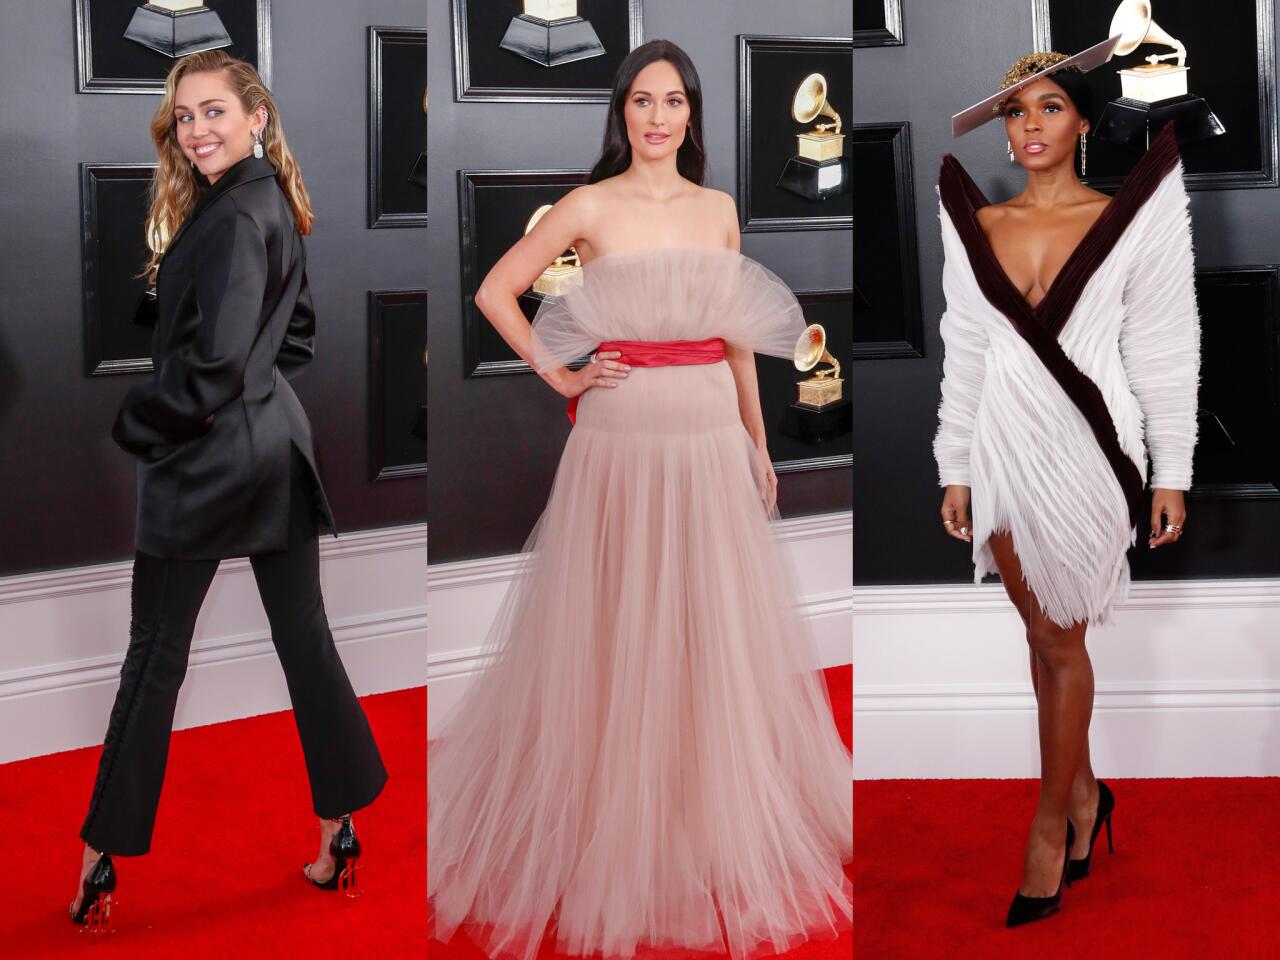 The Los Angeles Times Image section examines the red-carpet looks at the 2019 Grammy Awards. Some are beautiful showstoppers; others are jaw-droppers.